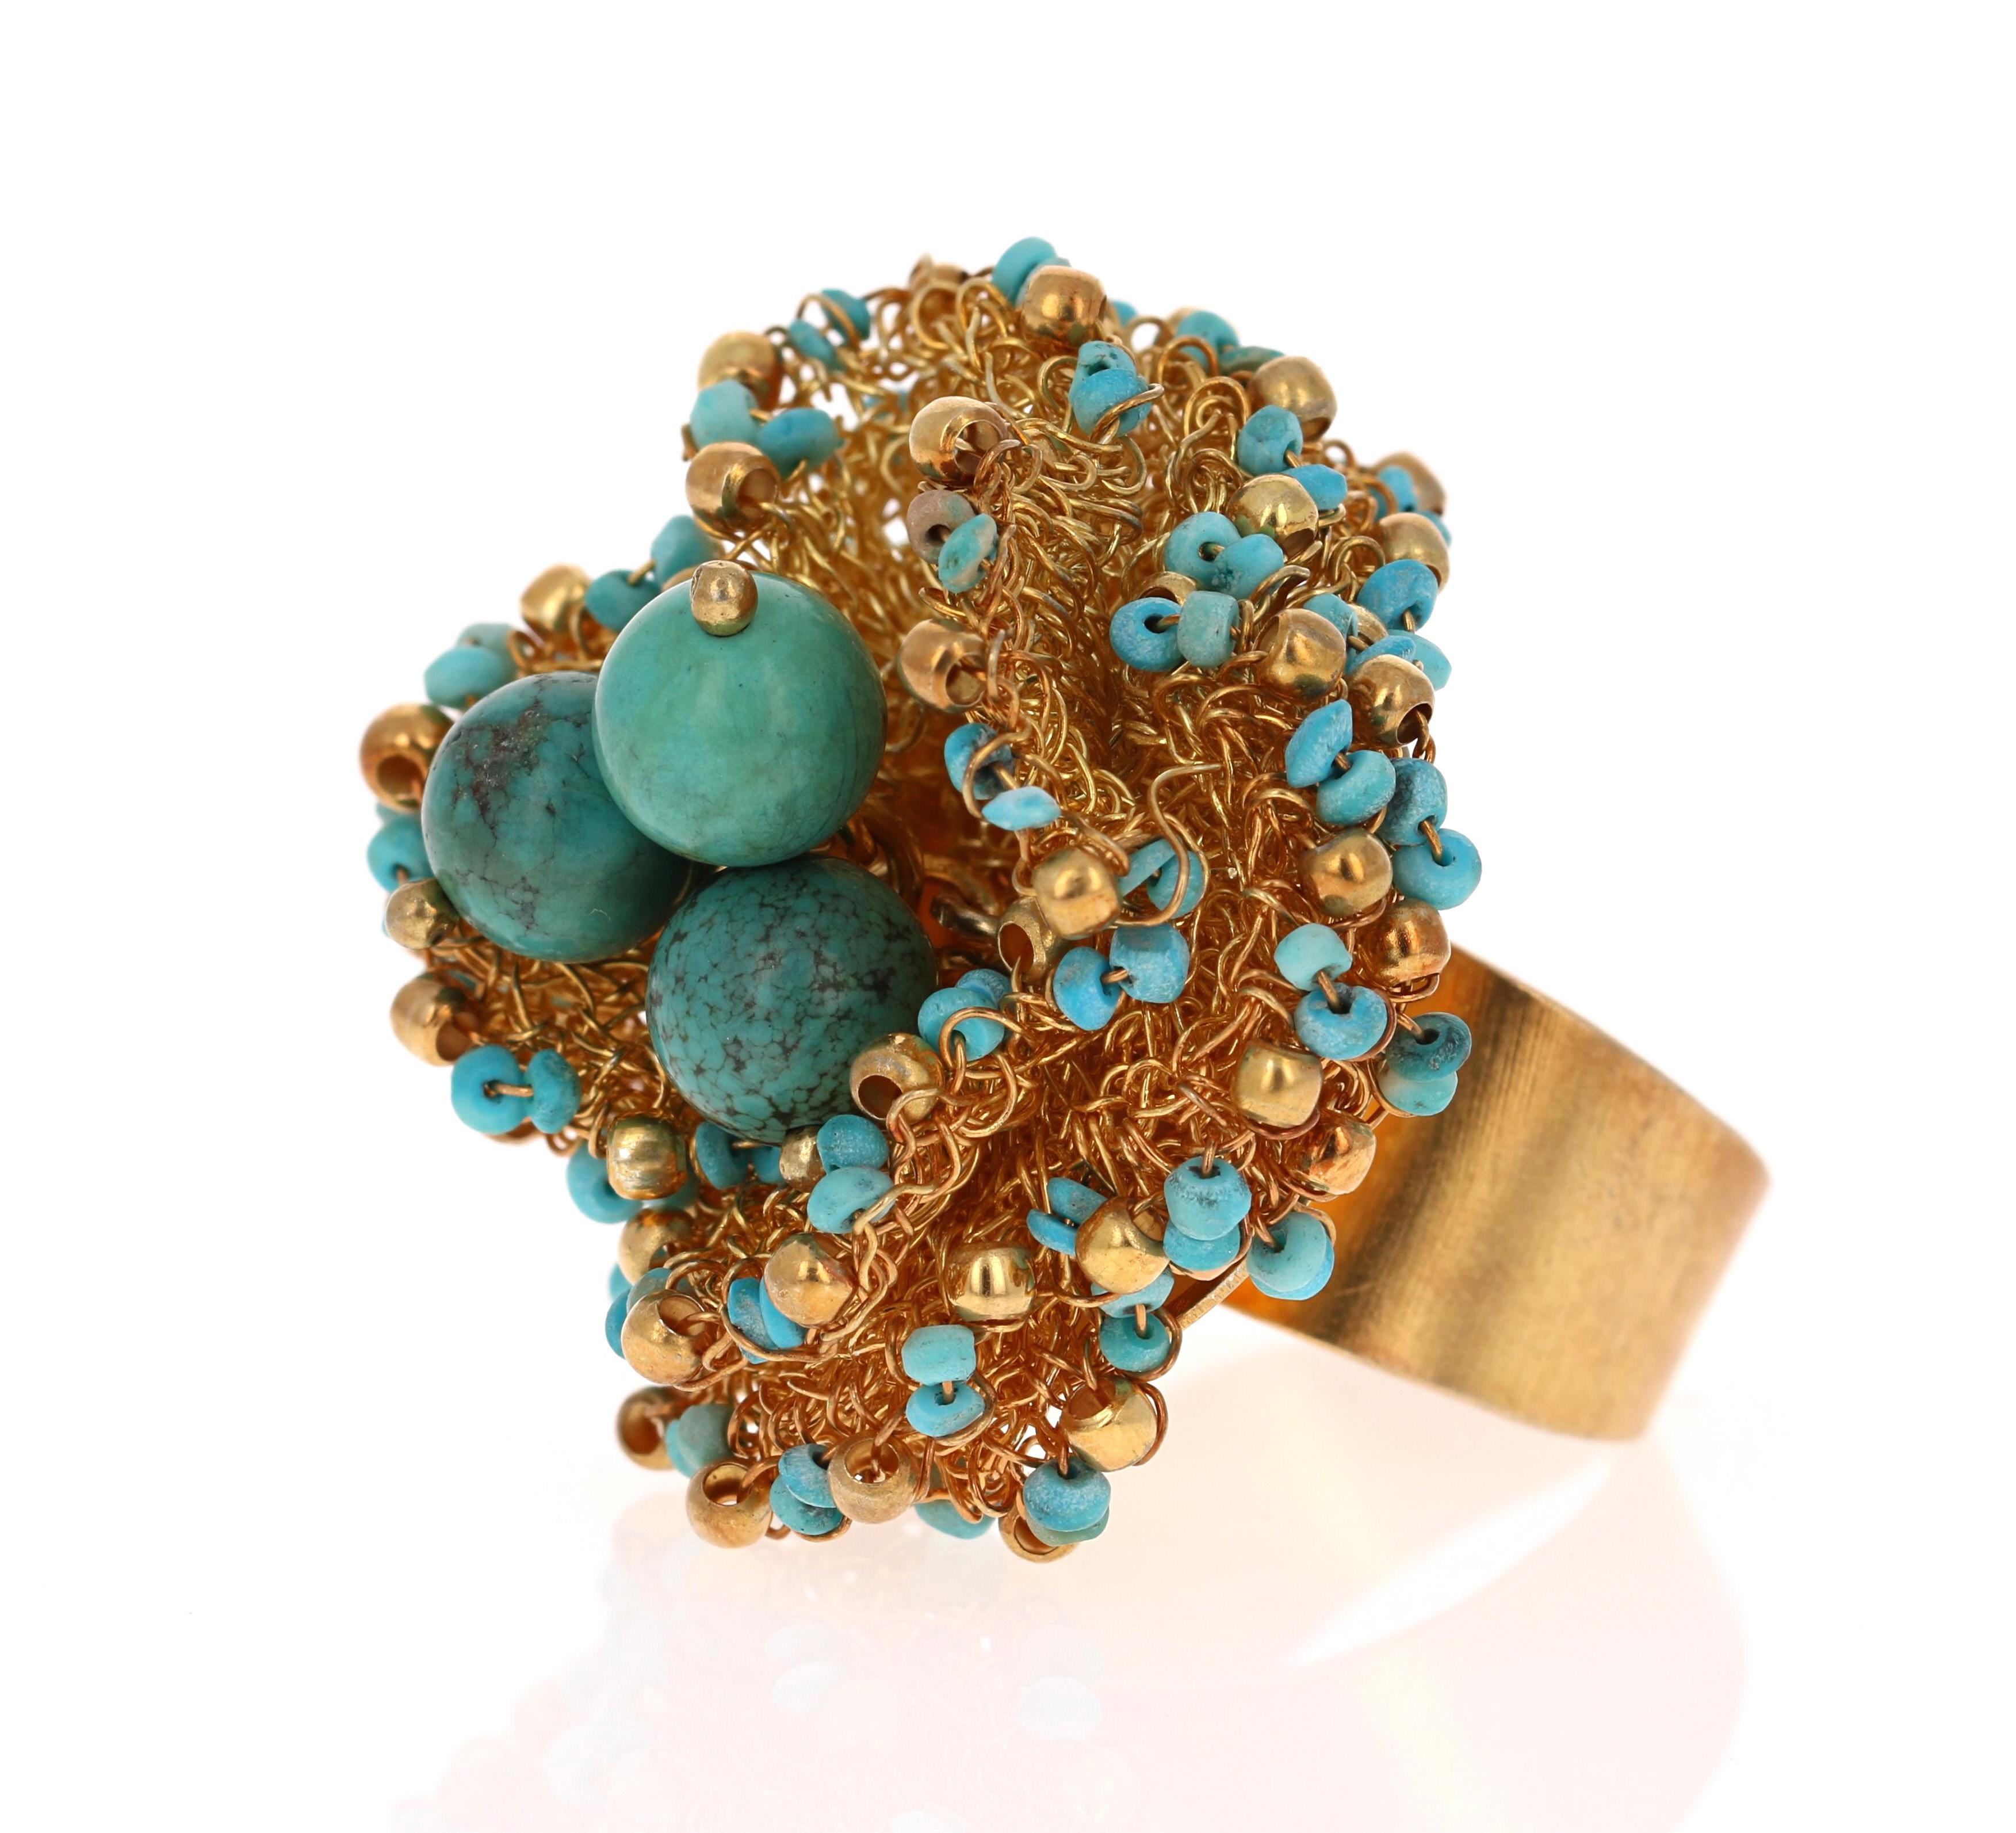 Stunning Turquoise Bead Ring - 925 Silver & 22Kt Gold Plated
Turkish Design - Hand crafted in Turkey
925 Stamp
One of a kind design
Ring Size is Adjustable